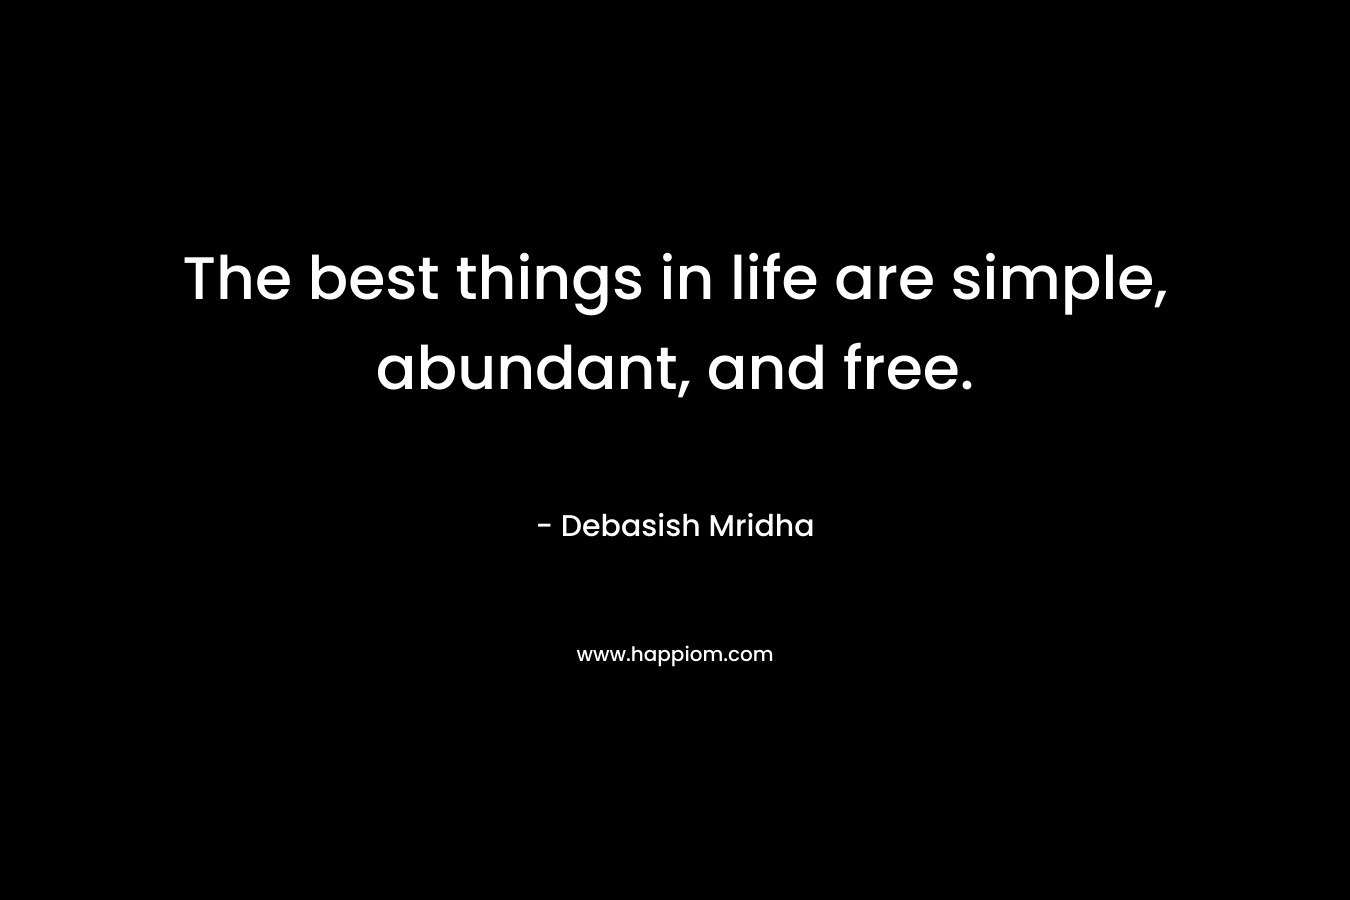 The best things in life are simple, abundant, and free. – Debasish Mridha